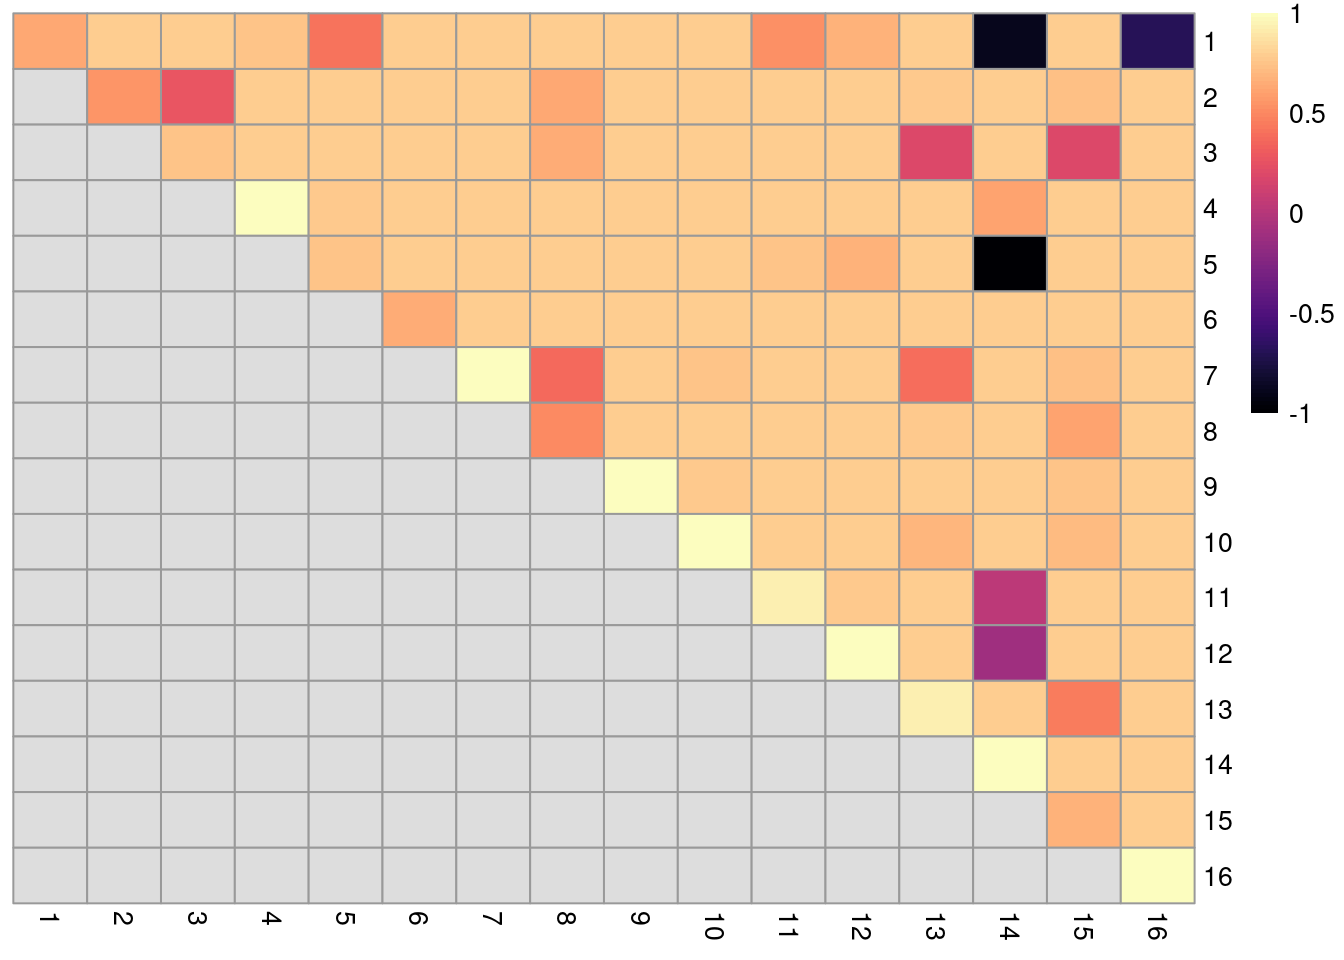 Heatmap of ARI-derived ratios from bootstrapping of graph-based clustering in the PBMC dataset. Each row and column represents an original cluster and each entry is colored according to the value of the ARI ratio between that pair of clusters.